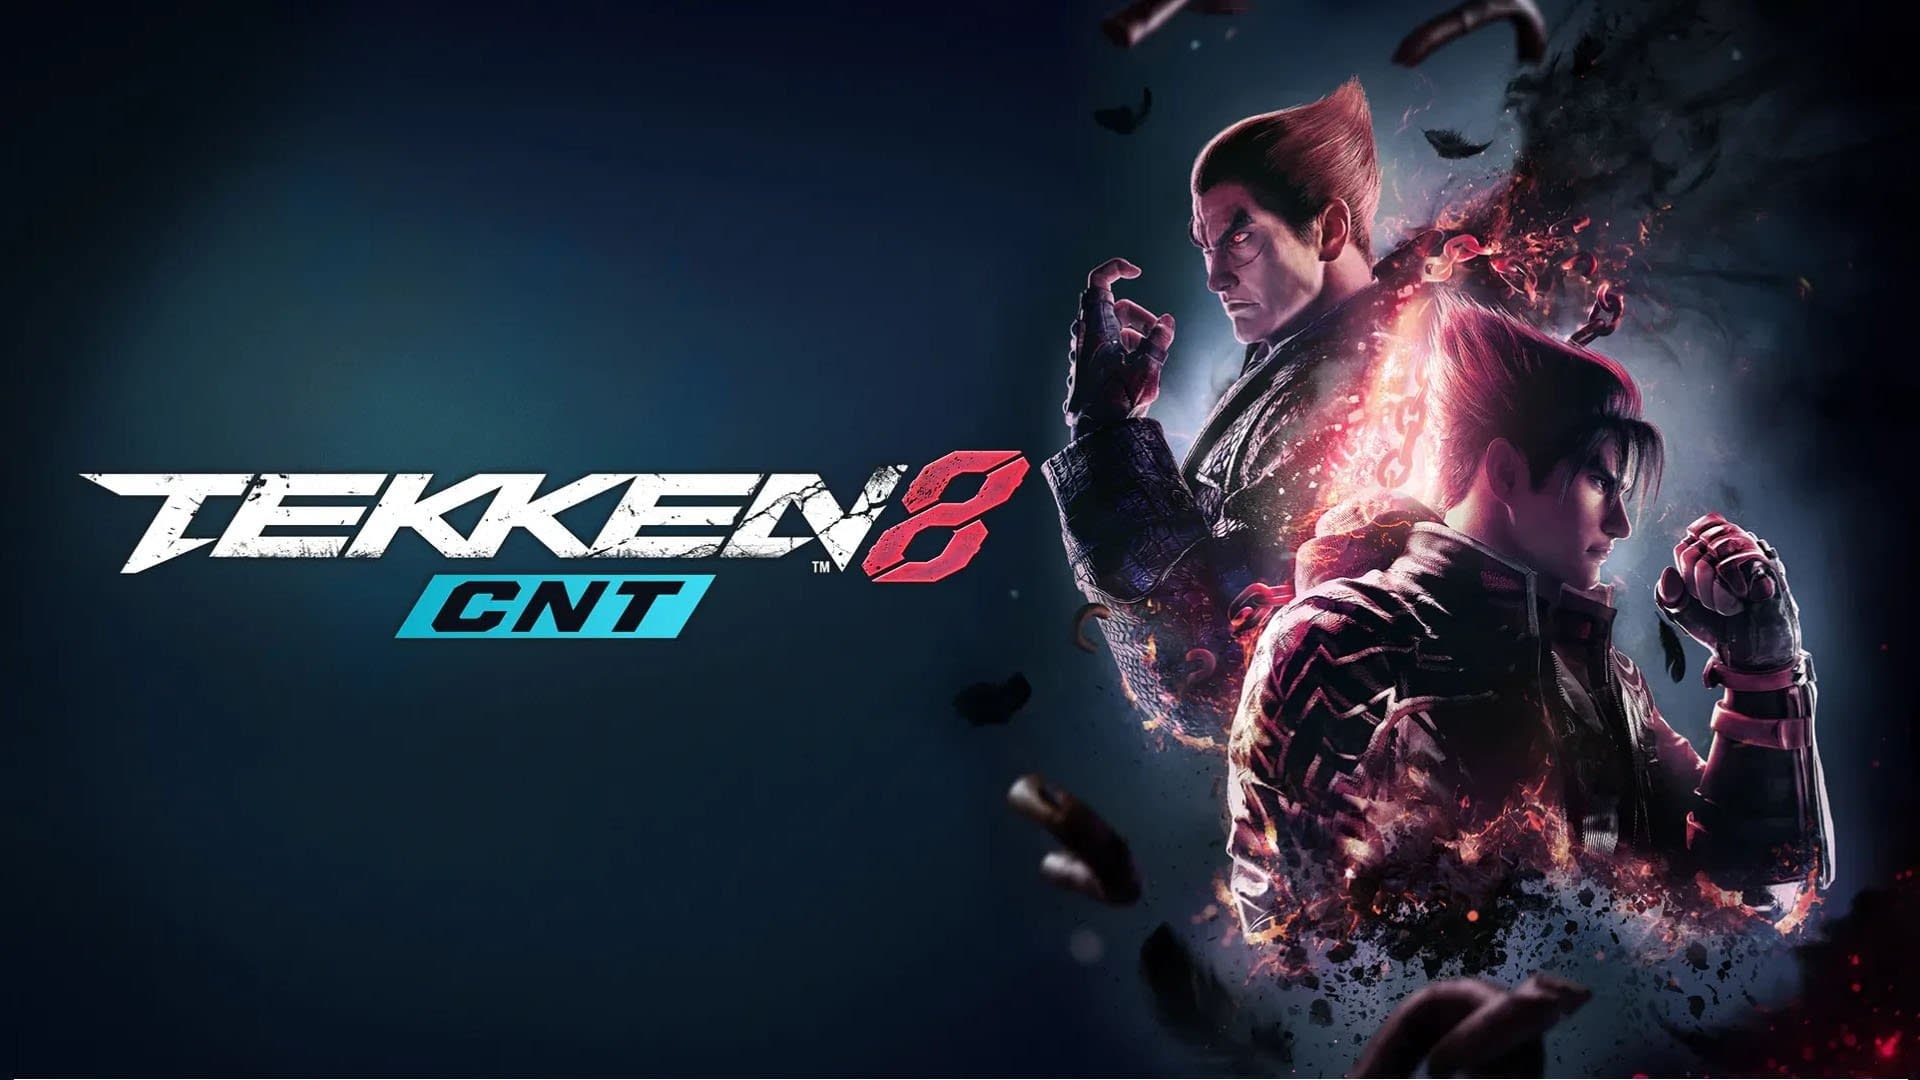 Closed network test dates were announced for Tekken 8: Registrations are open